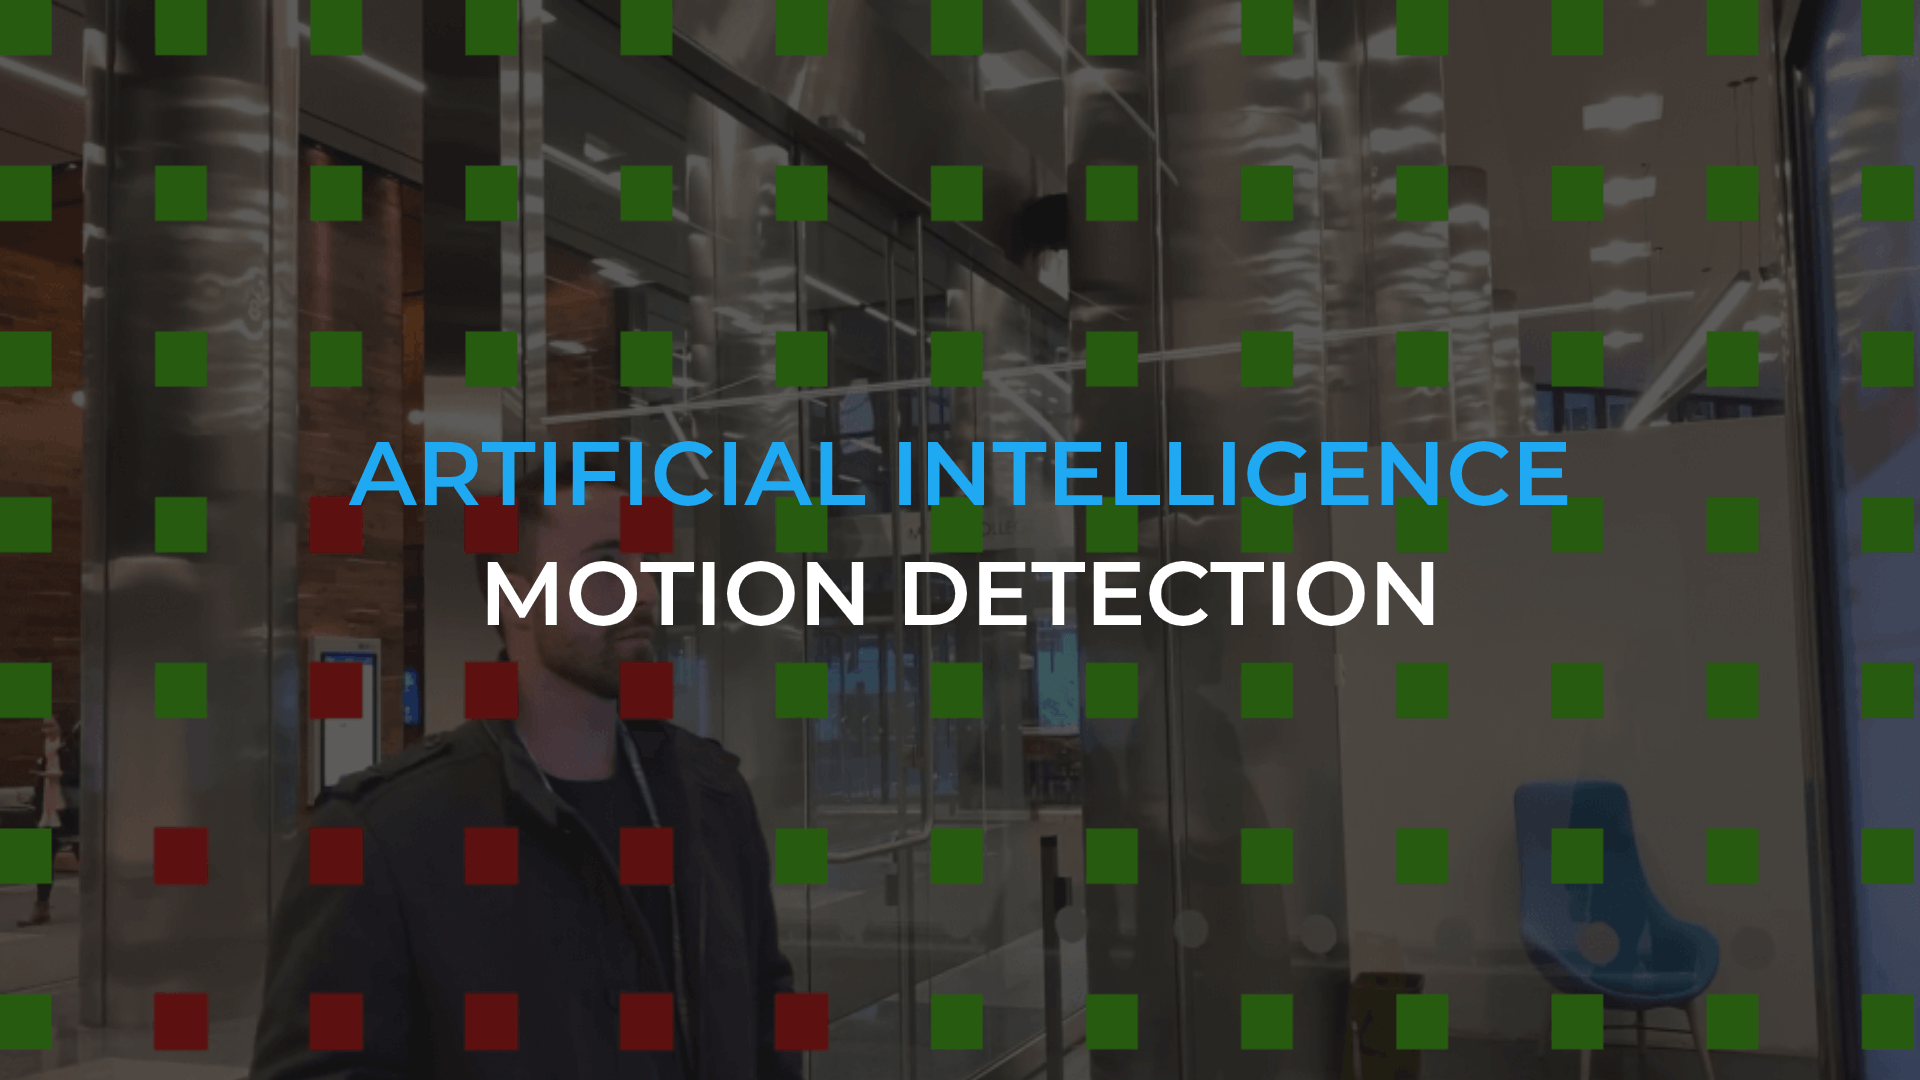 Artificial intelligence motion detection